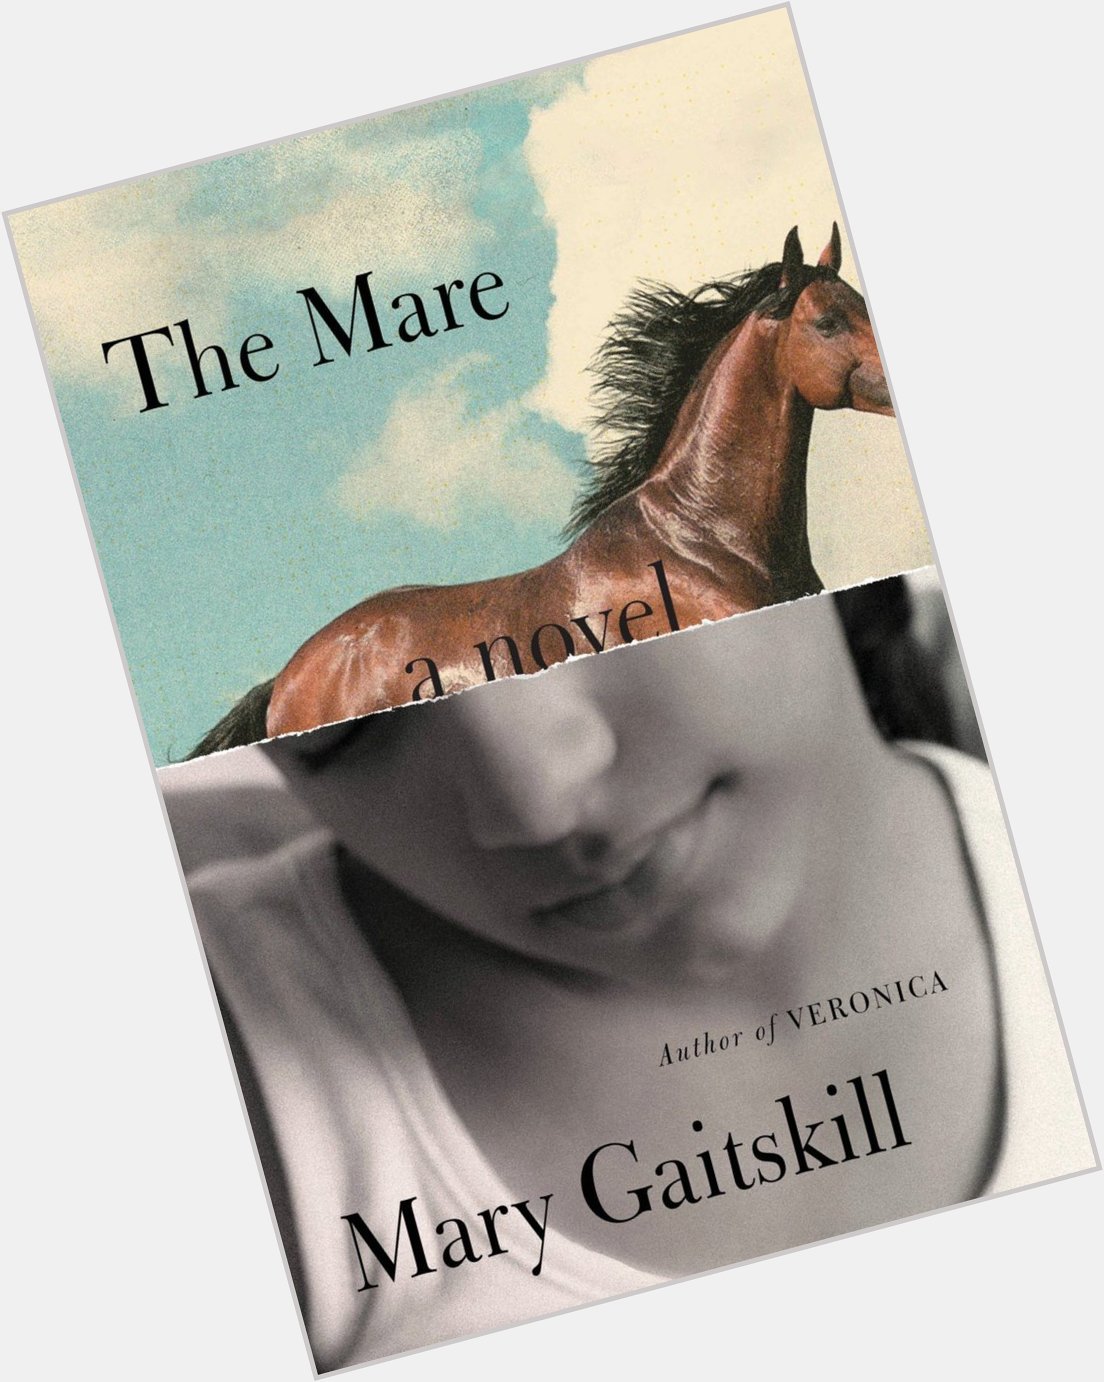 Happy birthday to Mary Gaitskill, who\s just published a powerful novel called THE MARE:  